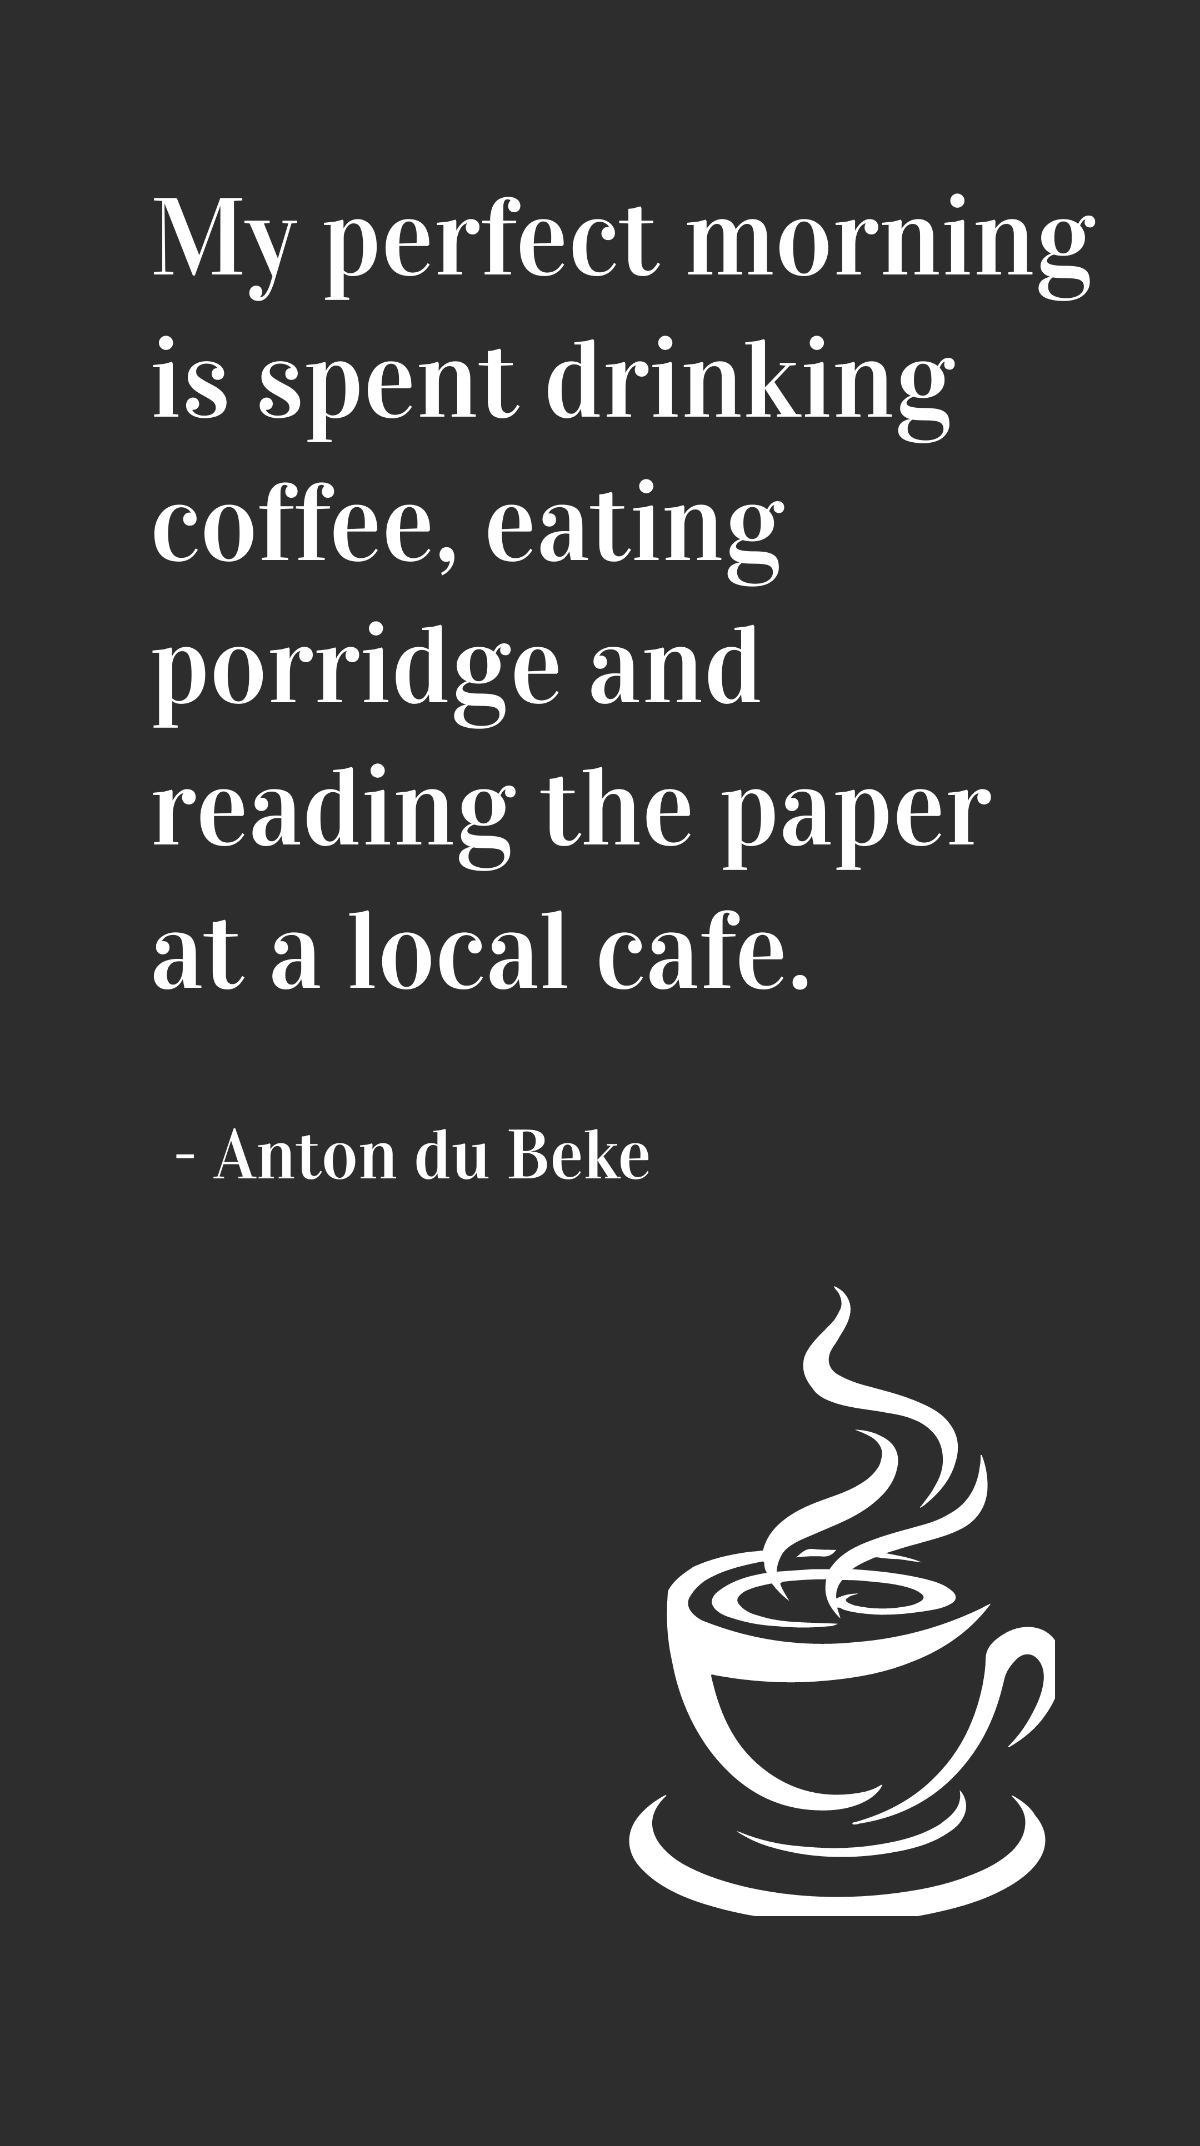 Anton du Beke - My perfect morning is spent drinking coffee, eating porridge and reading the paper at a local cafe. Template